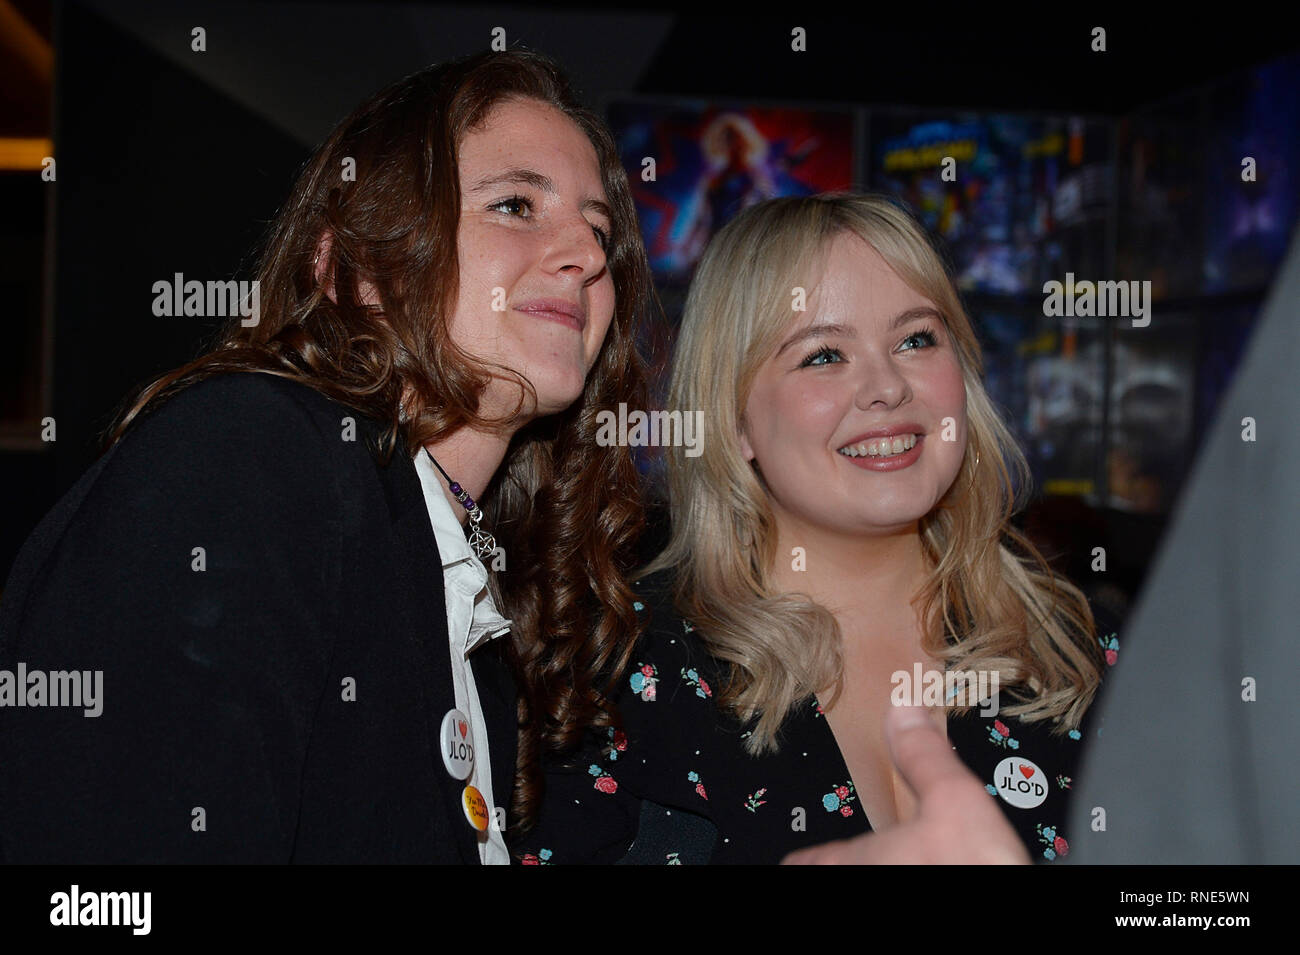 Londonderry, UK. 18th Feb, 2019. Derry Girls Series 2 Premiere, Londonderry, Northern Ireland: 18th February 2019. Actors Louisa Harland and Nicola Coughlan arrive at the Omniplex Cinema, Londonderry for the premiere of Derry Girls Series 2.  ©George Sweeney / Alamy Live News Credit: George Sweeney/Alamy Live News Stock Photo